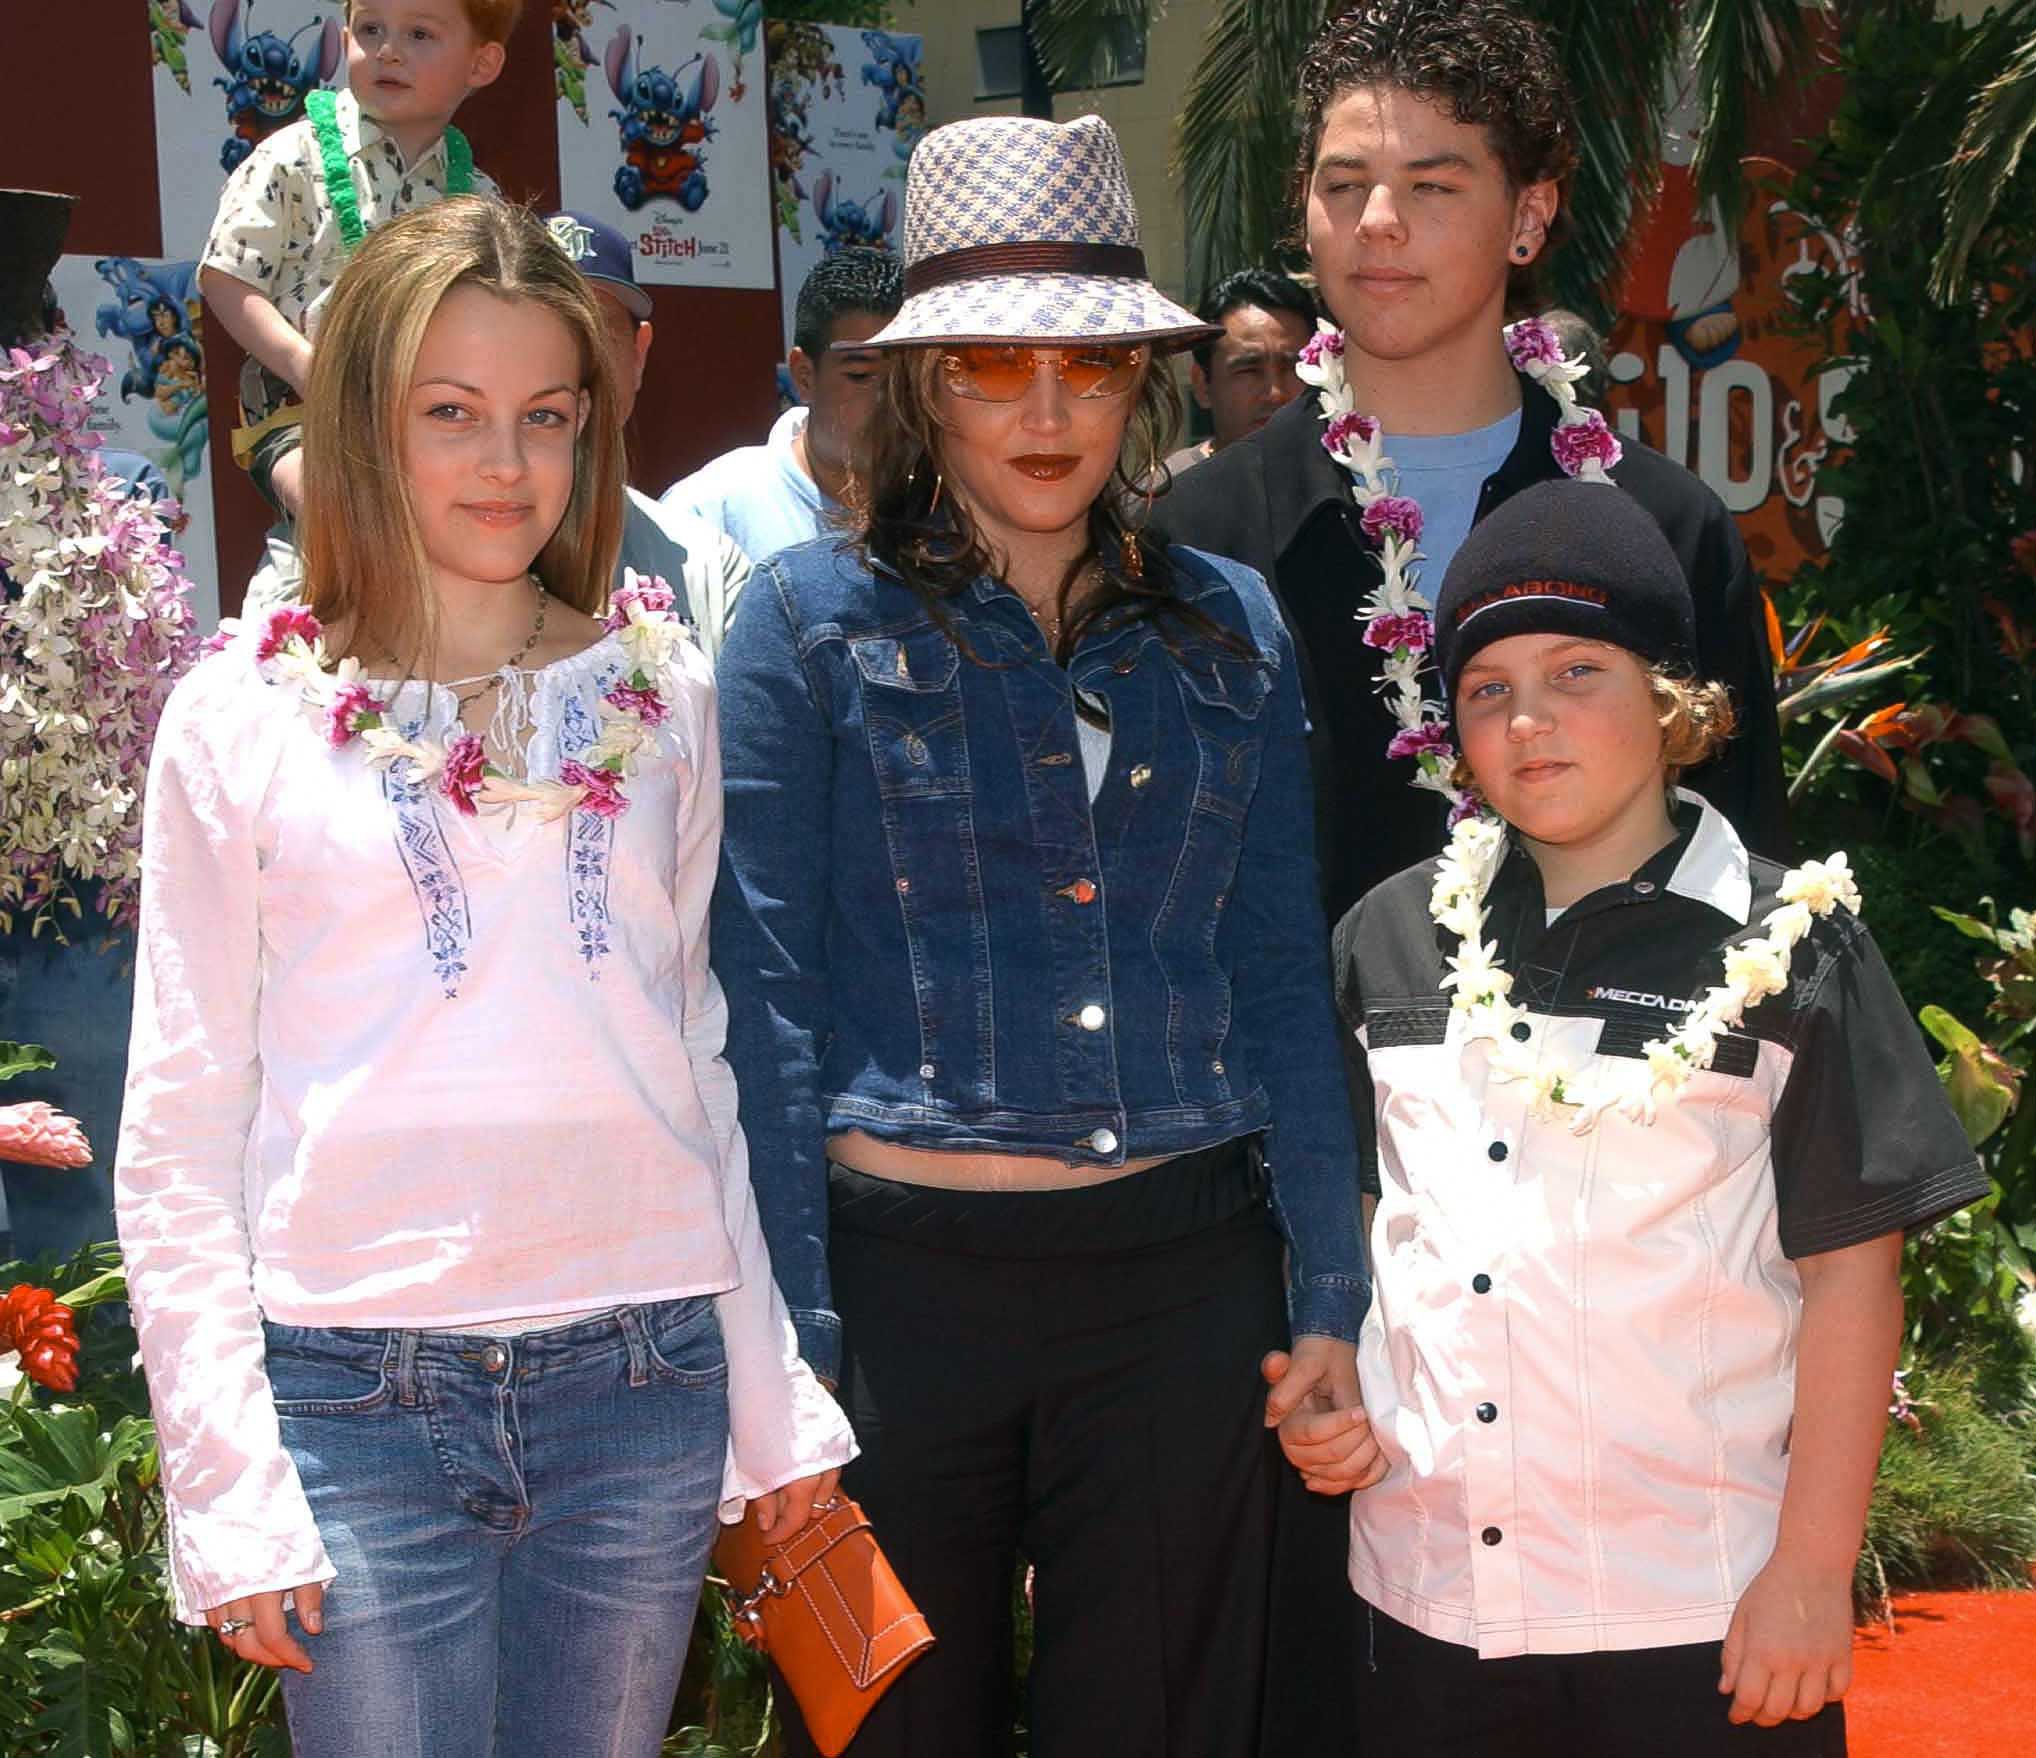 Lisa Marie Presley and her children Benjamin Keough (R), Riley Keough (L), and her half-brother Navarone Garibaldi (back) attend the premiere of "Lilo and Stitch" at the El Capitan theatre in Hollywood on June 16, 2002. | Source: Getty Images